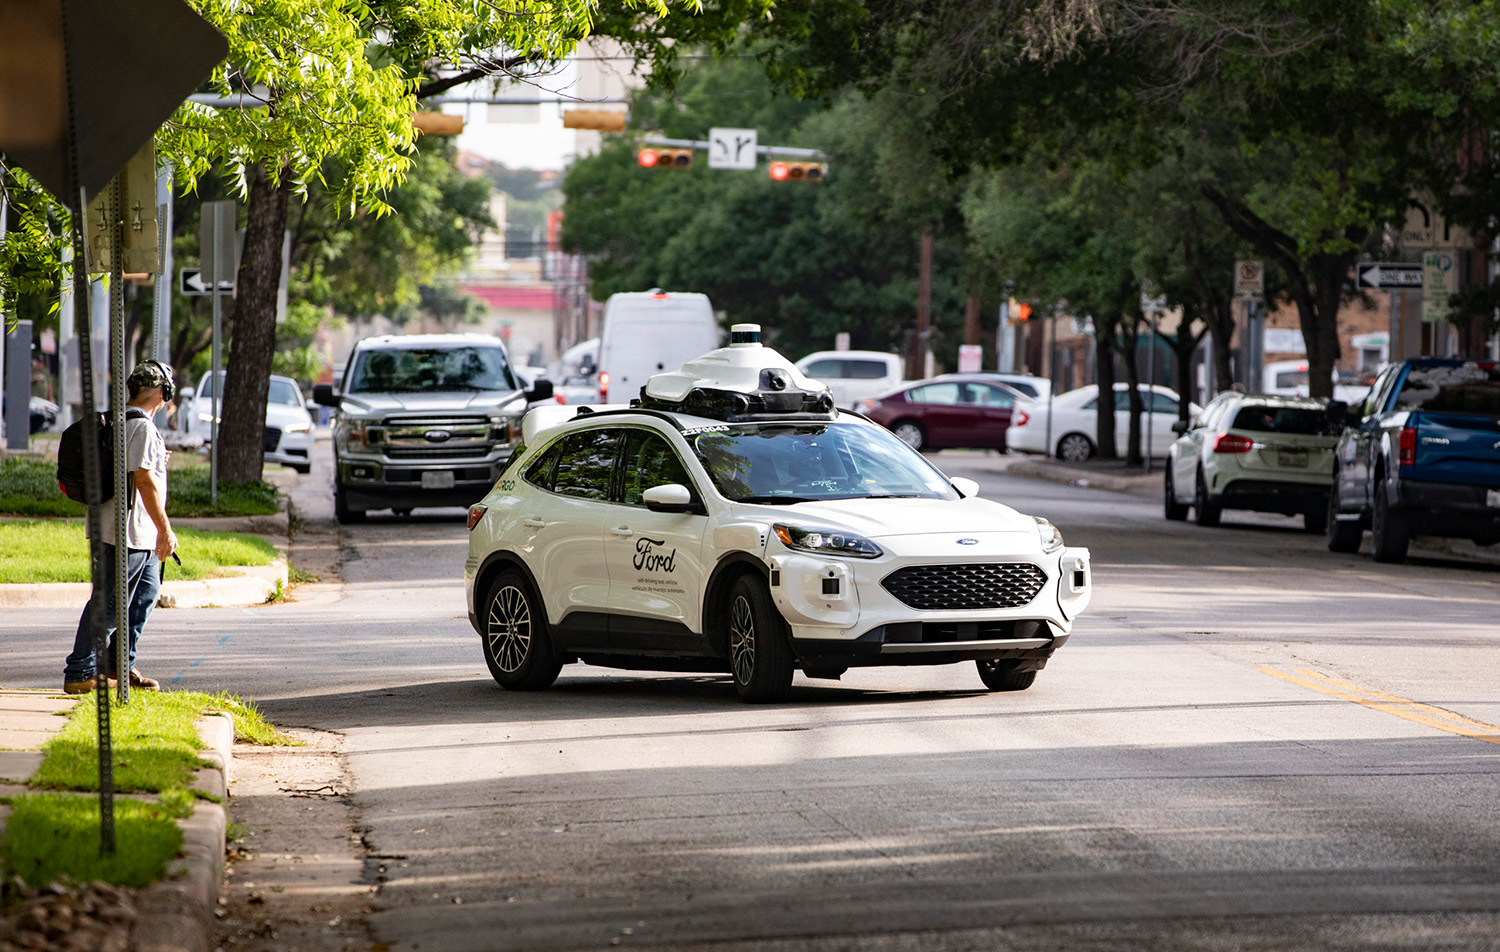 A fully autonomous Argo AI taxi and Ford Escape delivery on public roads in Austin, Texas